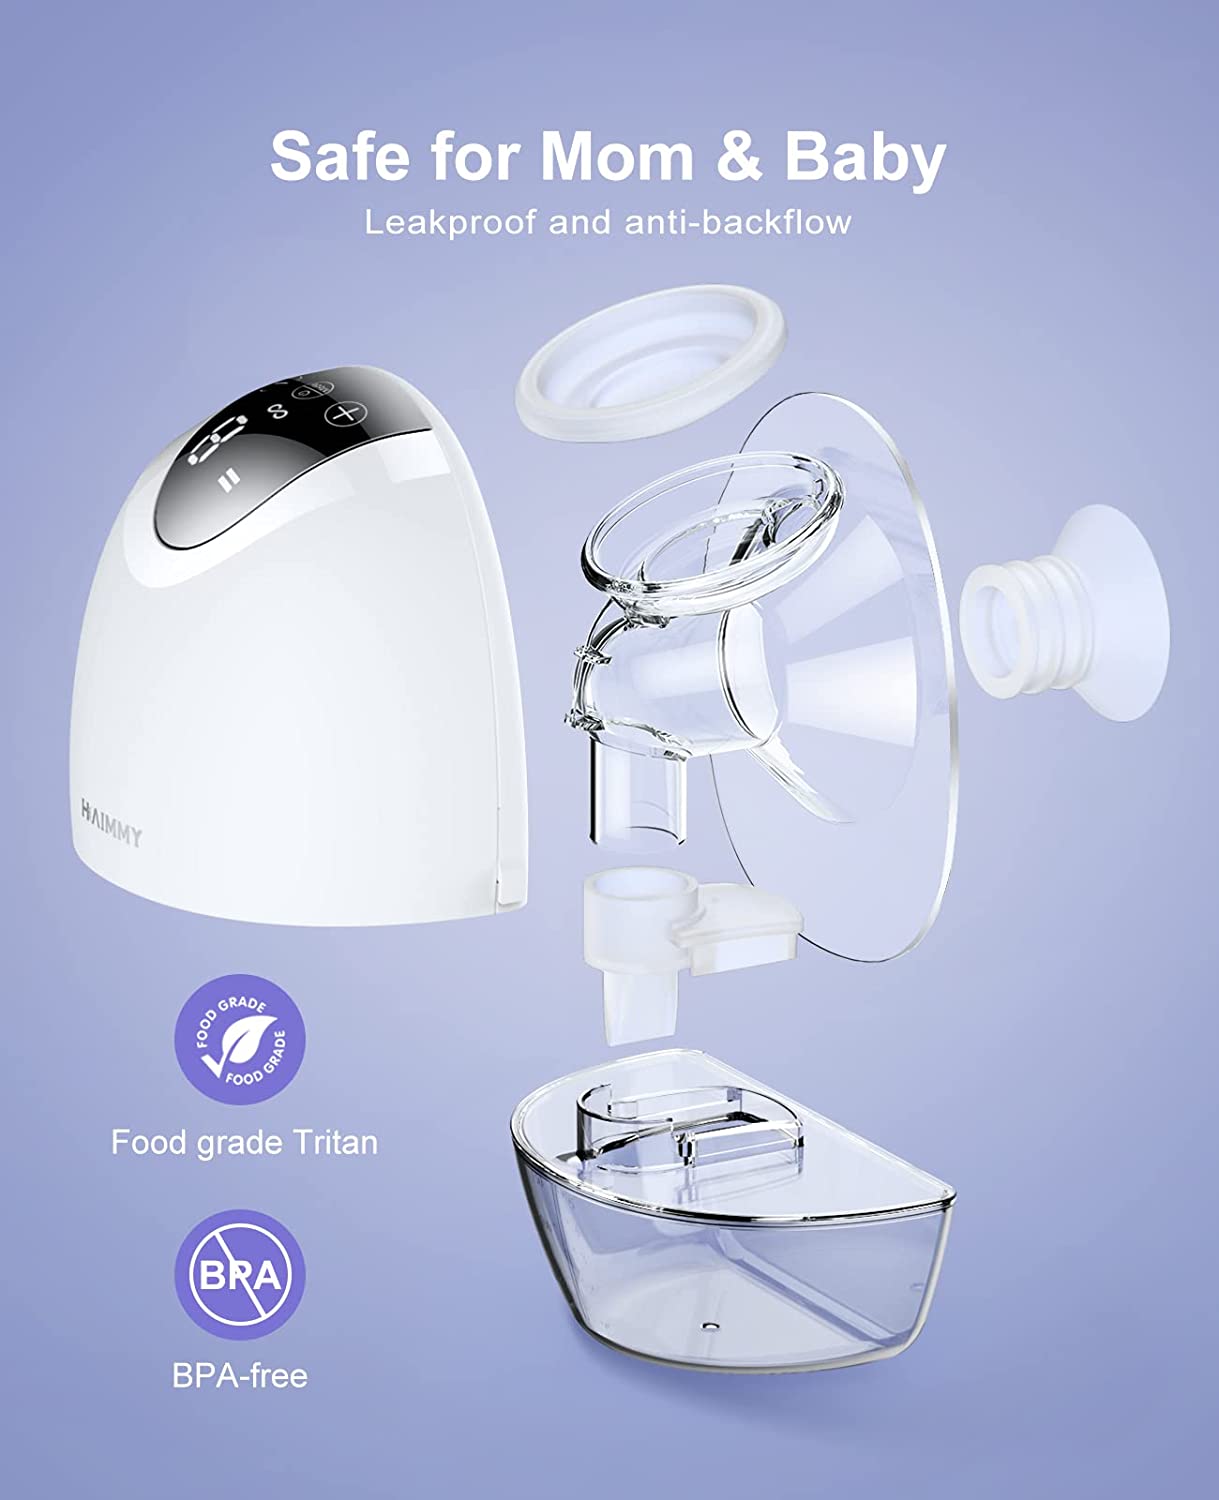 New Wearable Breast Pump Hands Free, Haimmy Electric Portable Wireless Breast Pumps with 3 Modes & 9 Levels, 19/21/24/28mm Flange, LCD Display, Leak-Proof, Low Noise Painless Breastfeeding Pump(1 Pack)